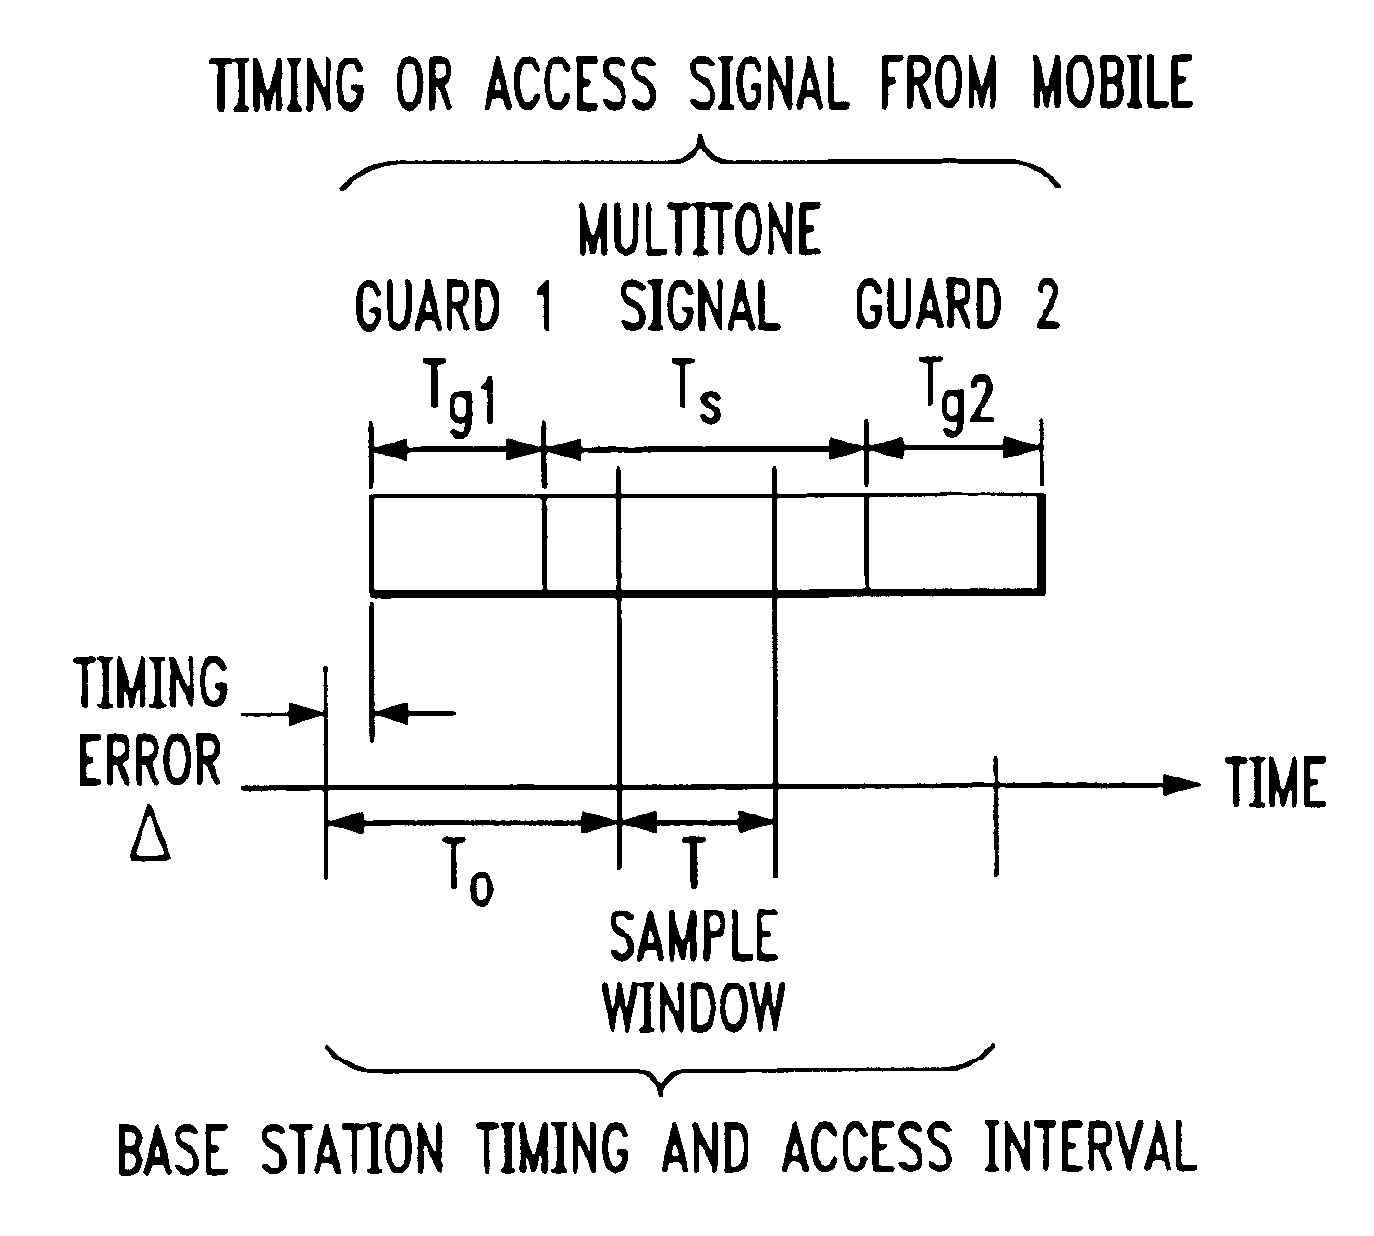 Signal construction, detection and estimation for uplink timing synchronization and access control in a multi-access wireless communication system